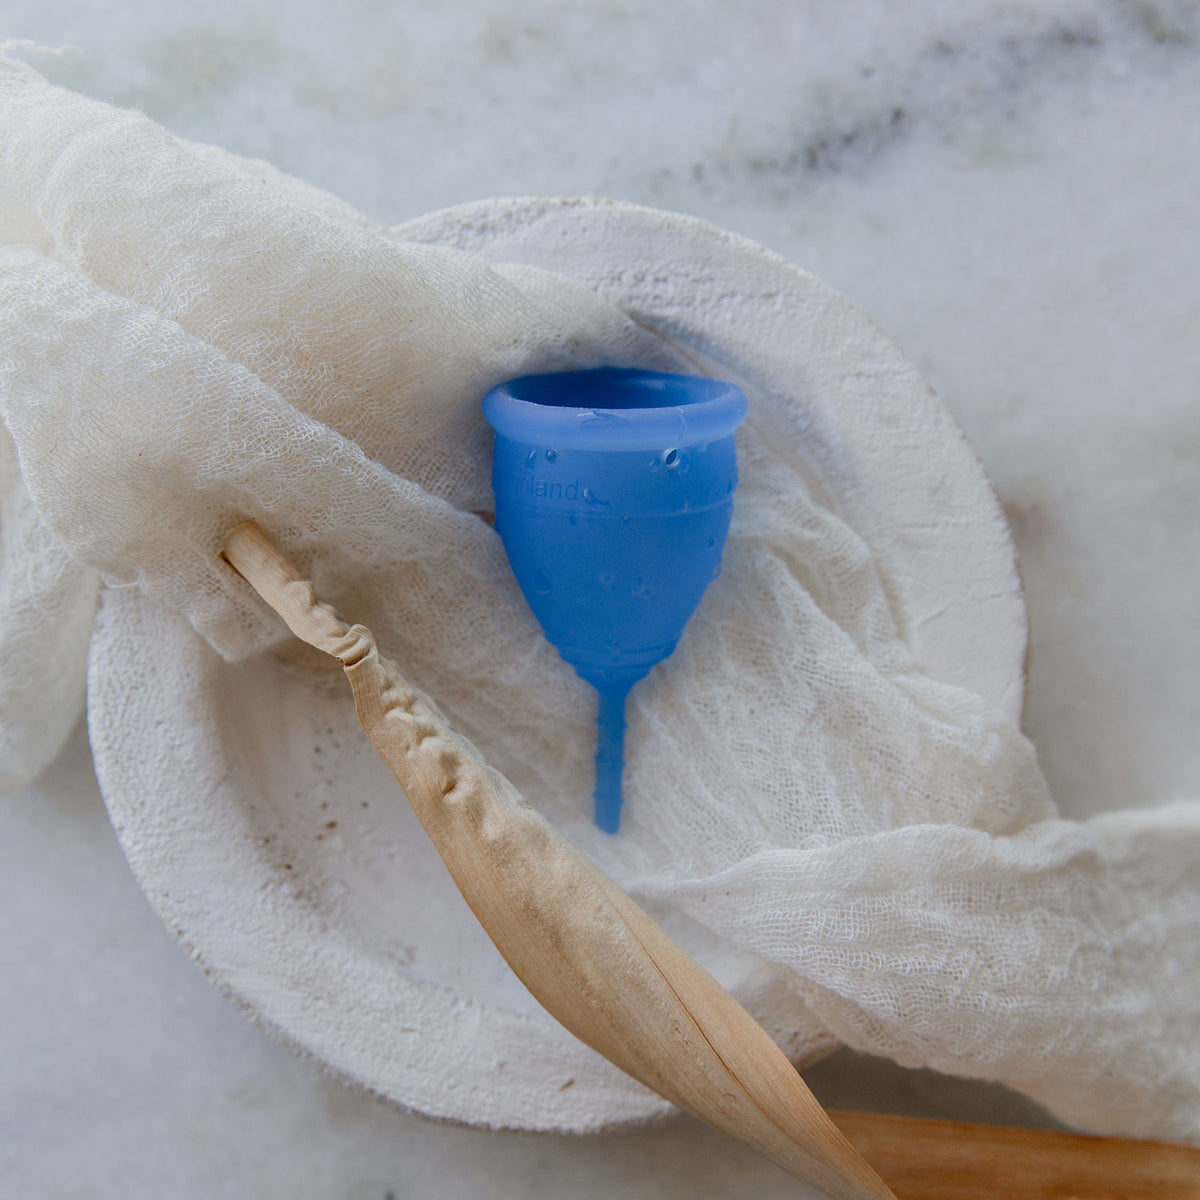 A blue Lunette menstrual cup with stem